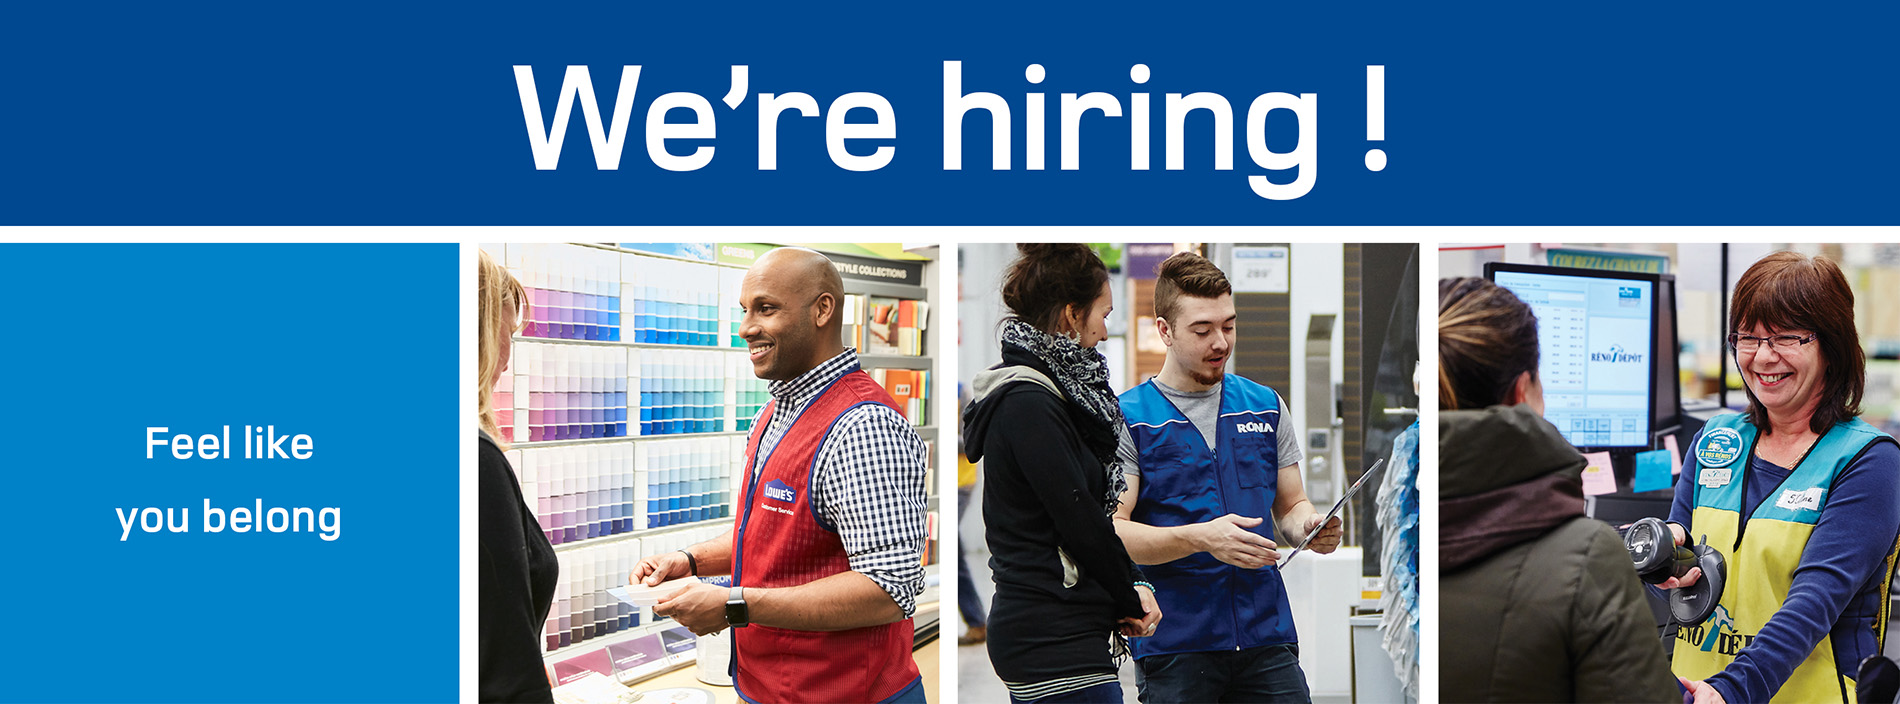 Lowe's Careers on X: Mark your calendars! @Lowes is hosting a National  Hiring Day on May 4th at all stores nationwide. Join us as we seek team  members to fill thousands of